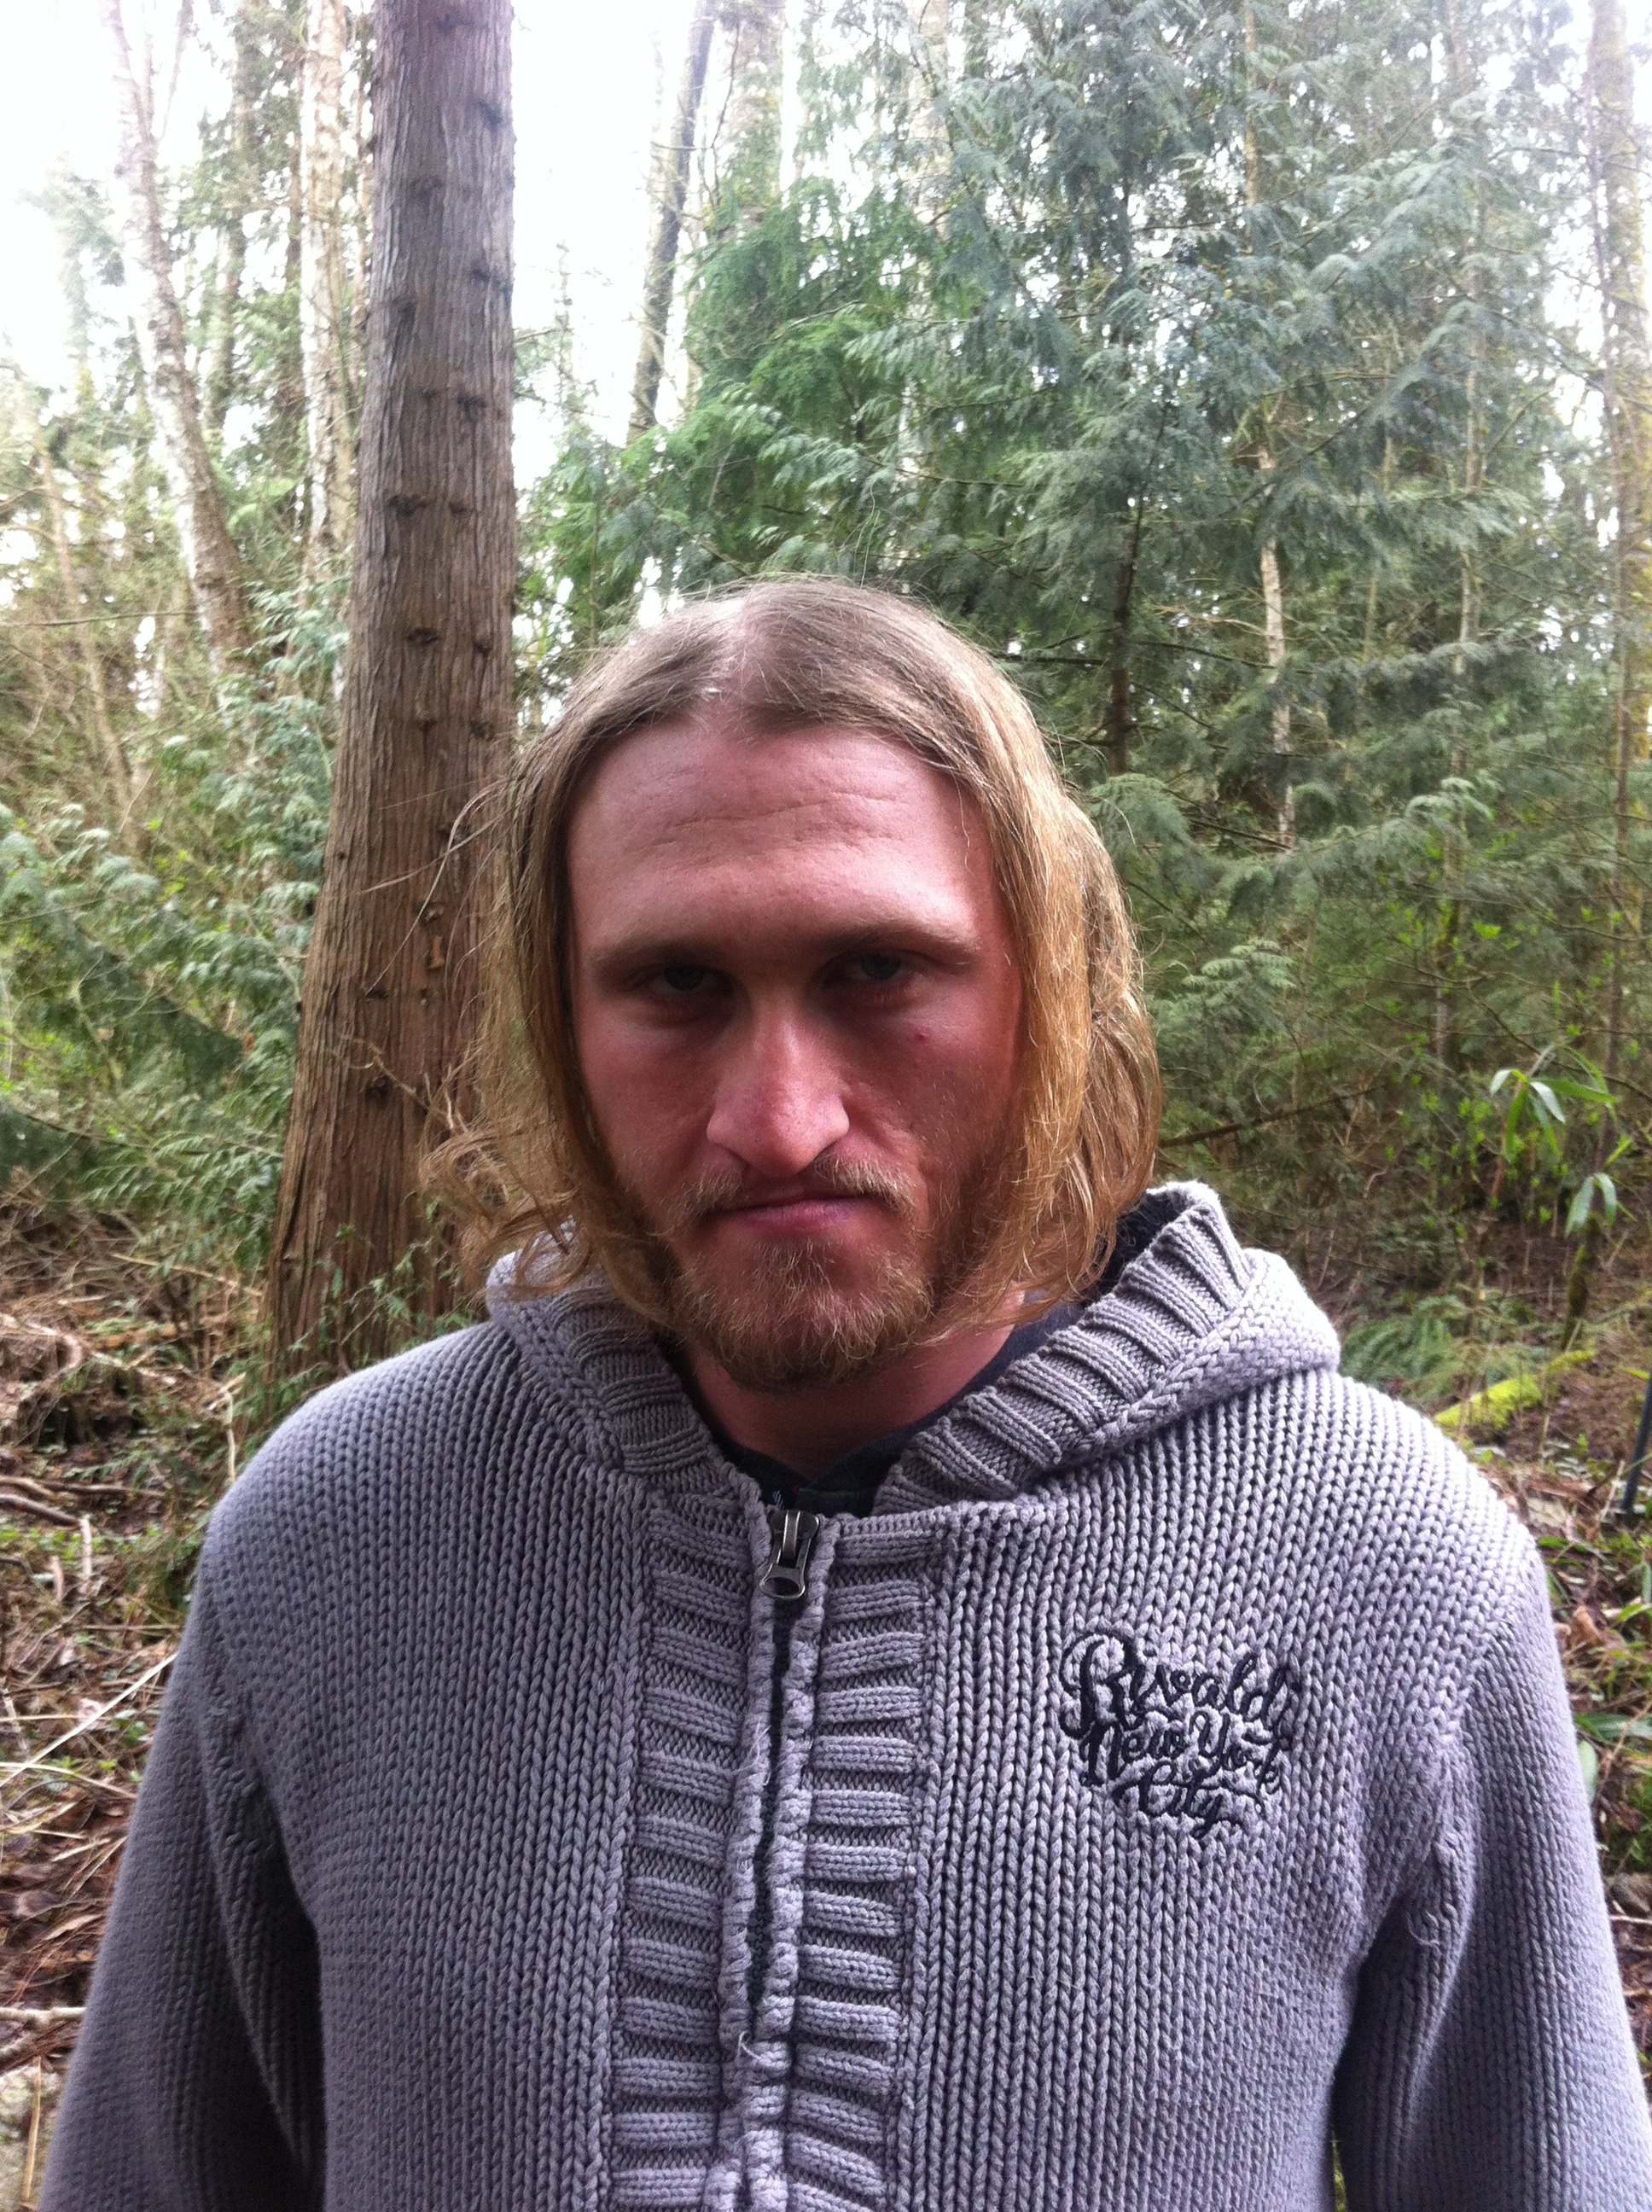 Me in the forests of British Columbia, Canada, pretending to be a viking.